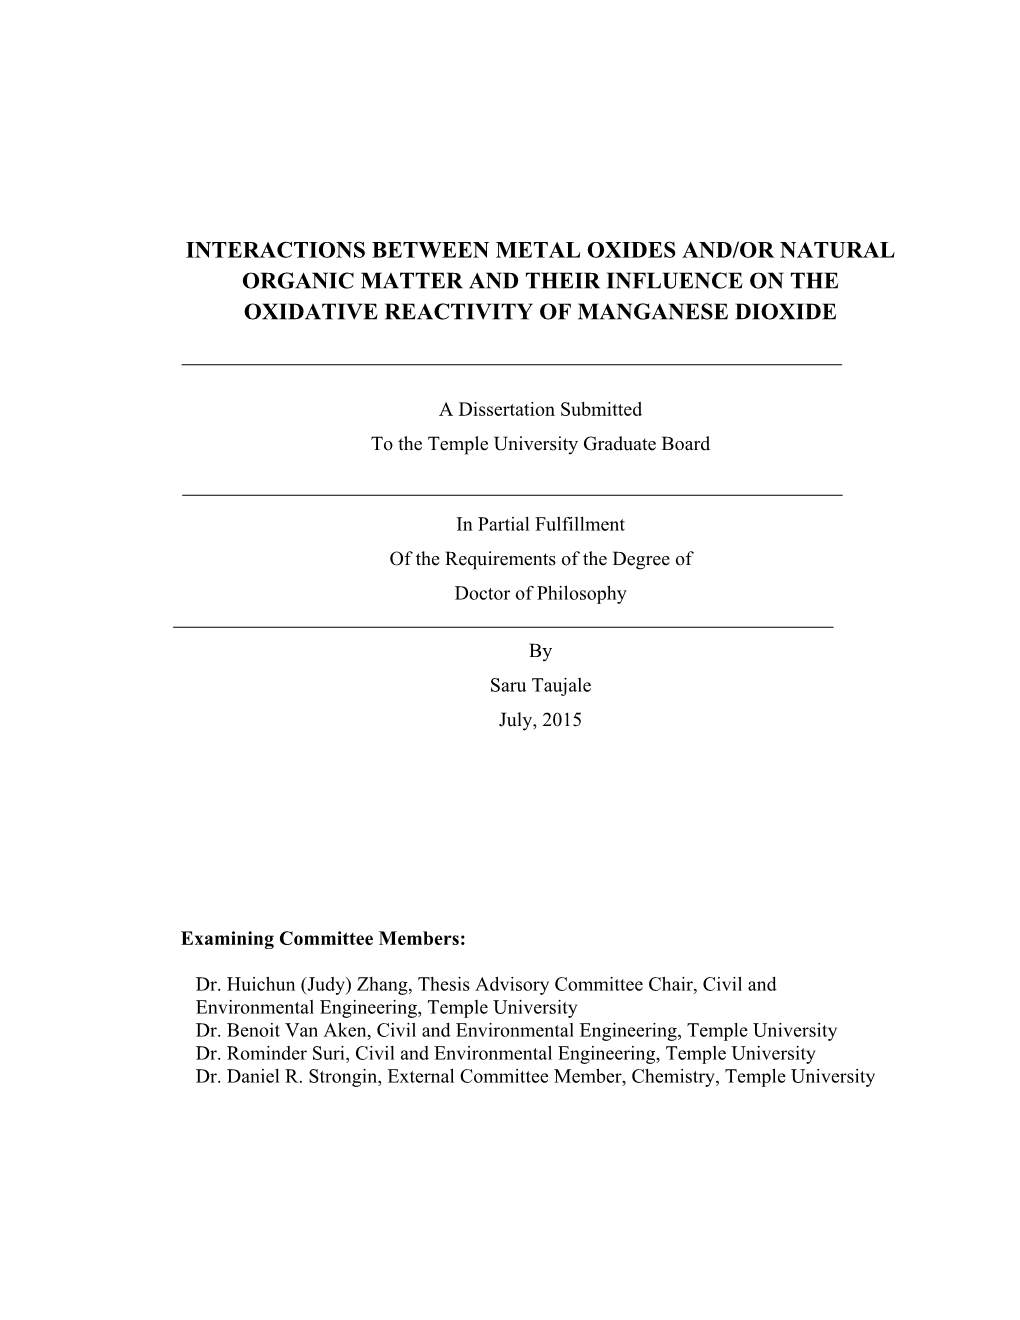 A Dissertation Submitted to the Temple University Graduate Board